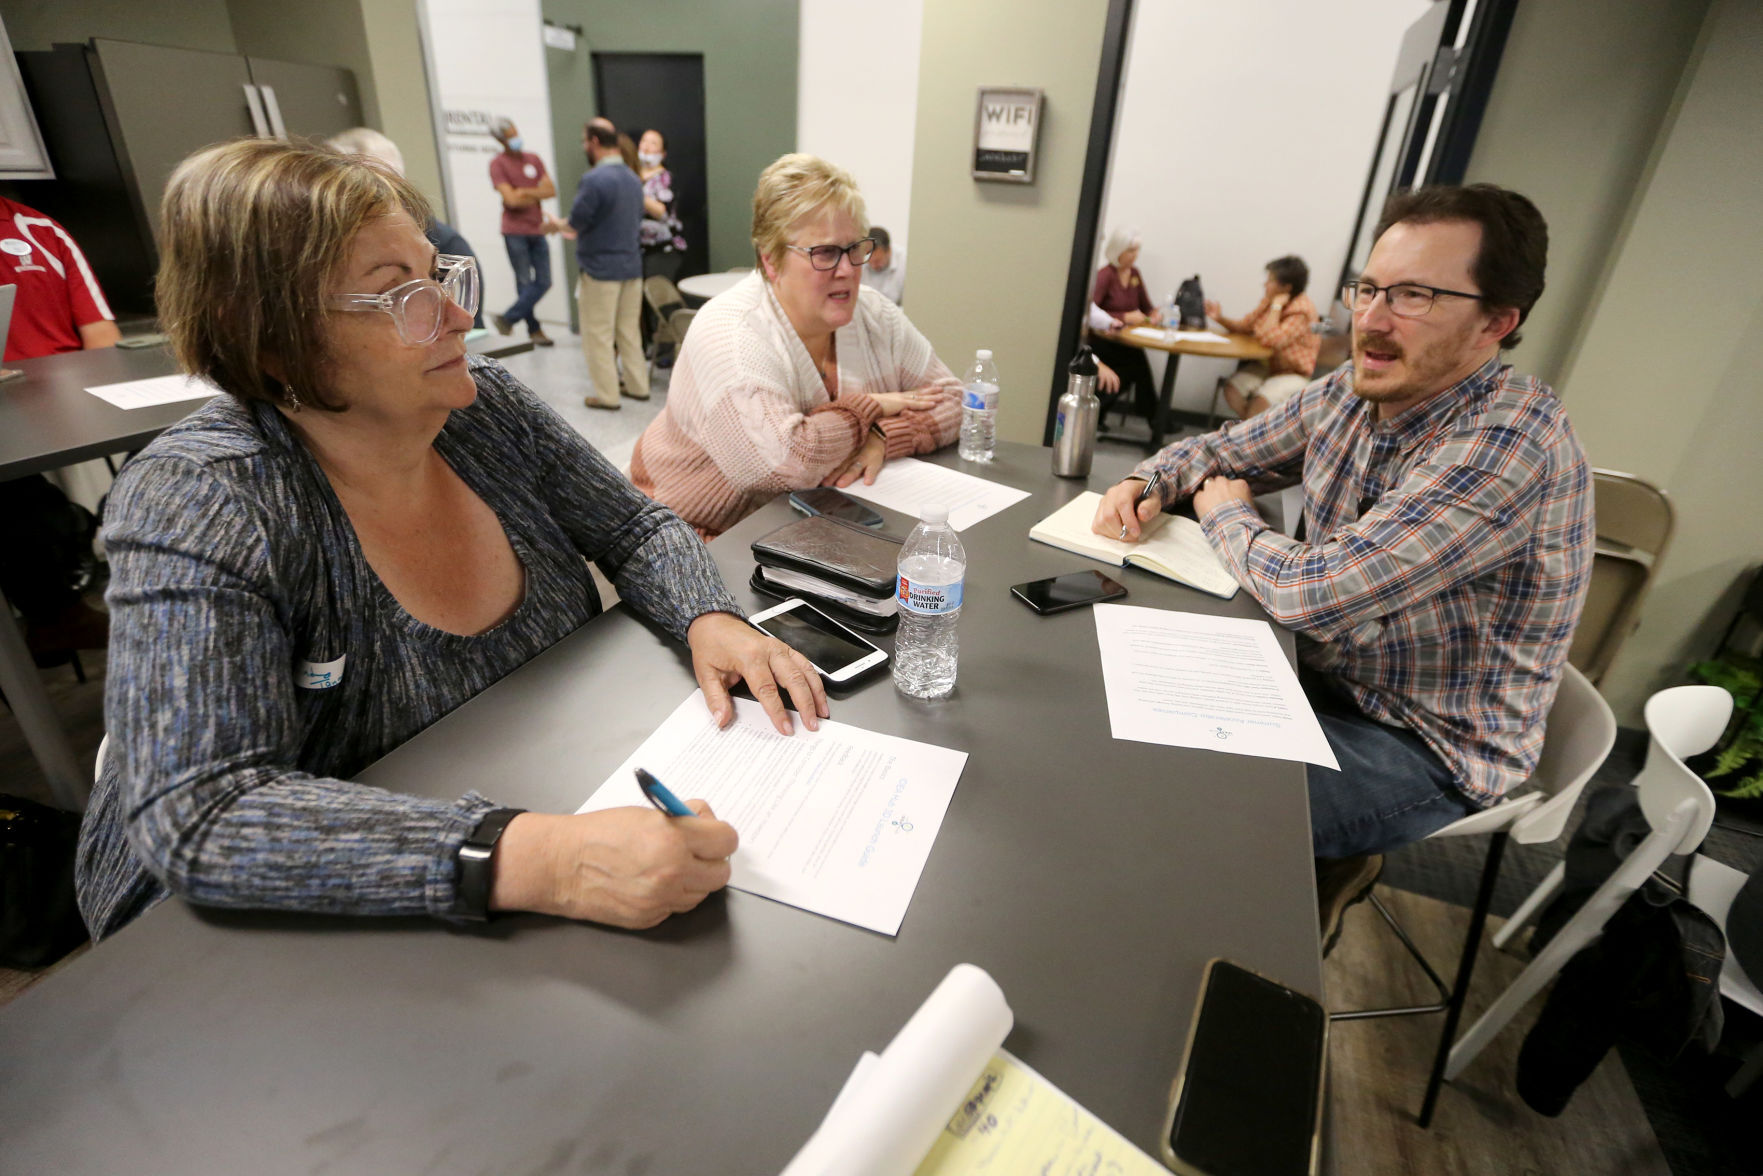 Cindy Tang (from left), Barb Clark and Ryan Del Balso discuss ideas during the grand opening of the Innovation Driving Entrepreneurship Accelerator Hub, known as the IDEA Hub, at Platteville Business Incubator in Platteville, Wis., on Monday.    PHOTO CREDIT: JESSICA REILLY